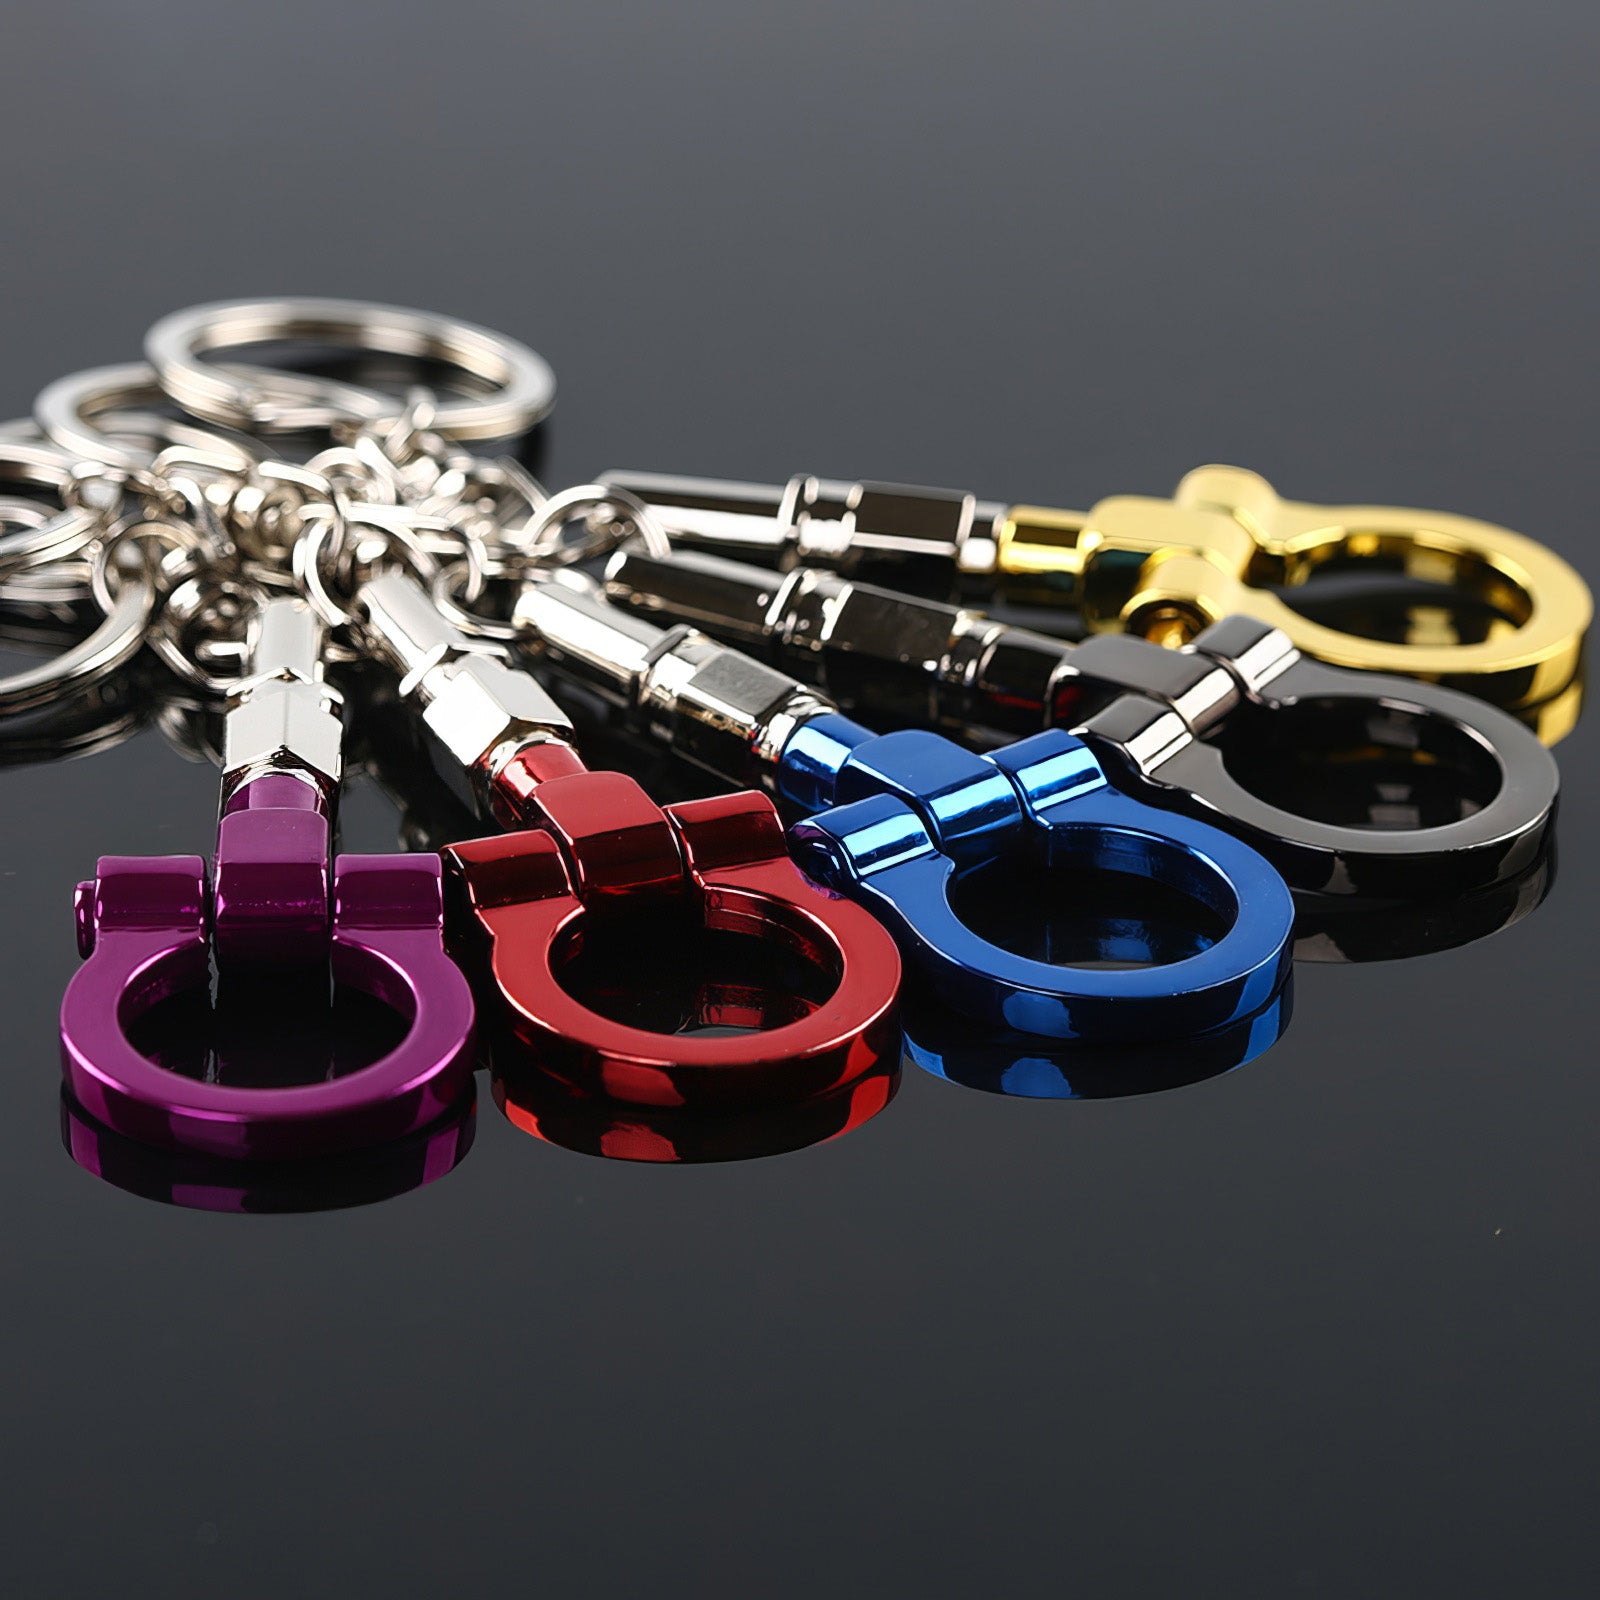 Tow hook keychains with purple, red, blue, black, and gold hooks.